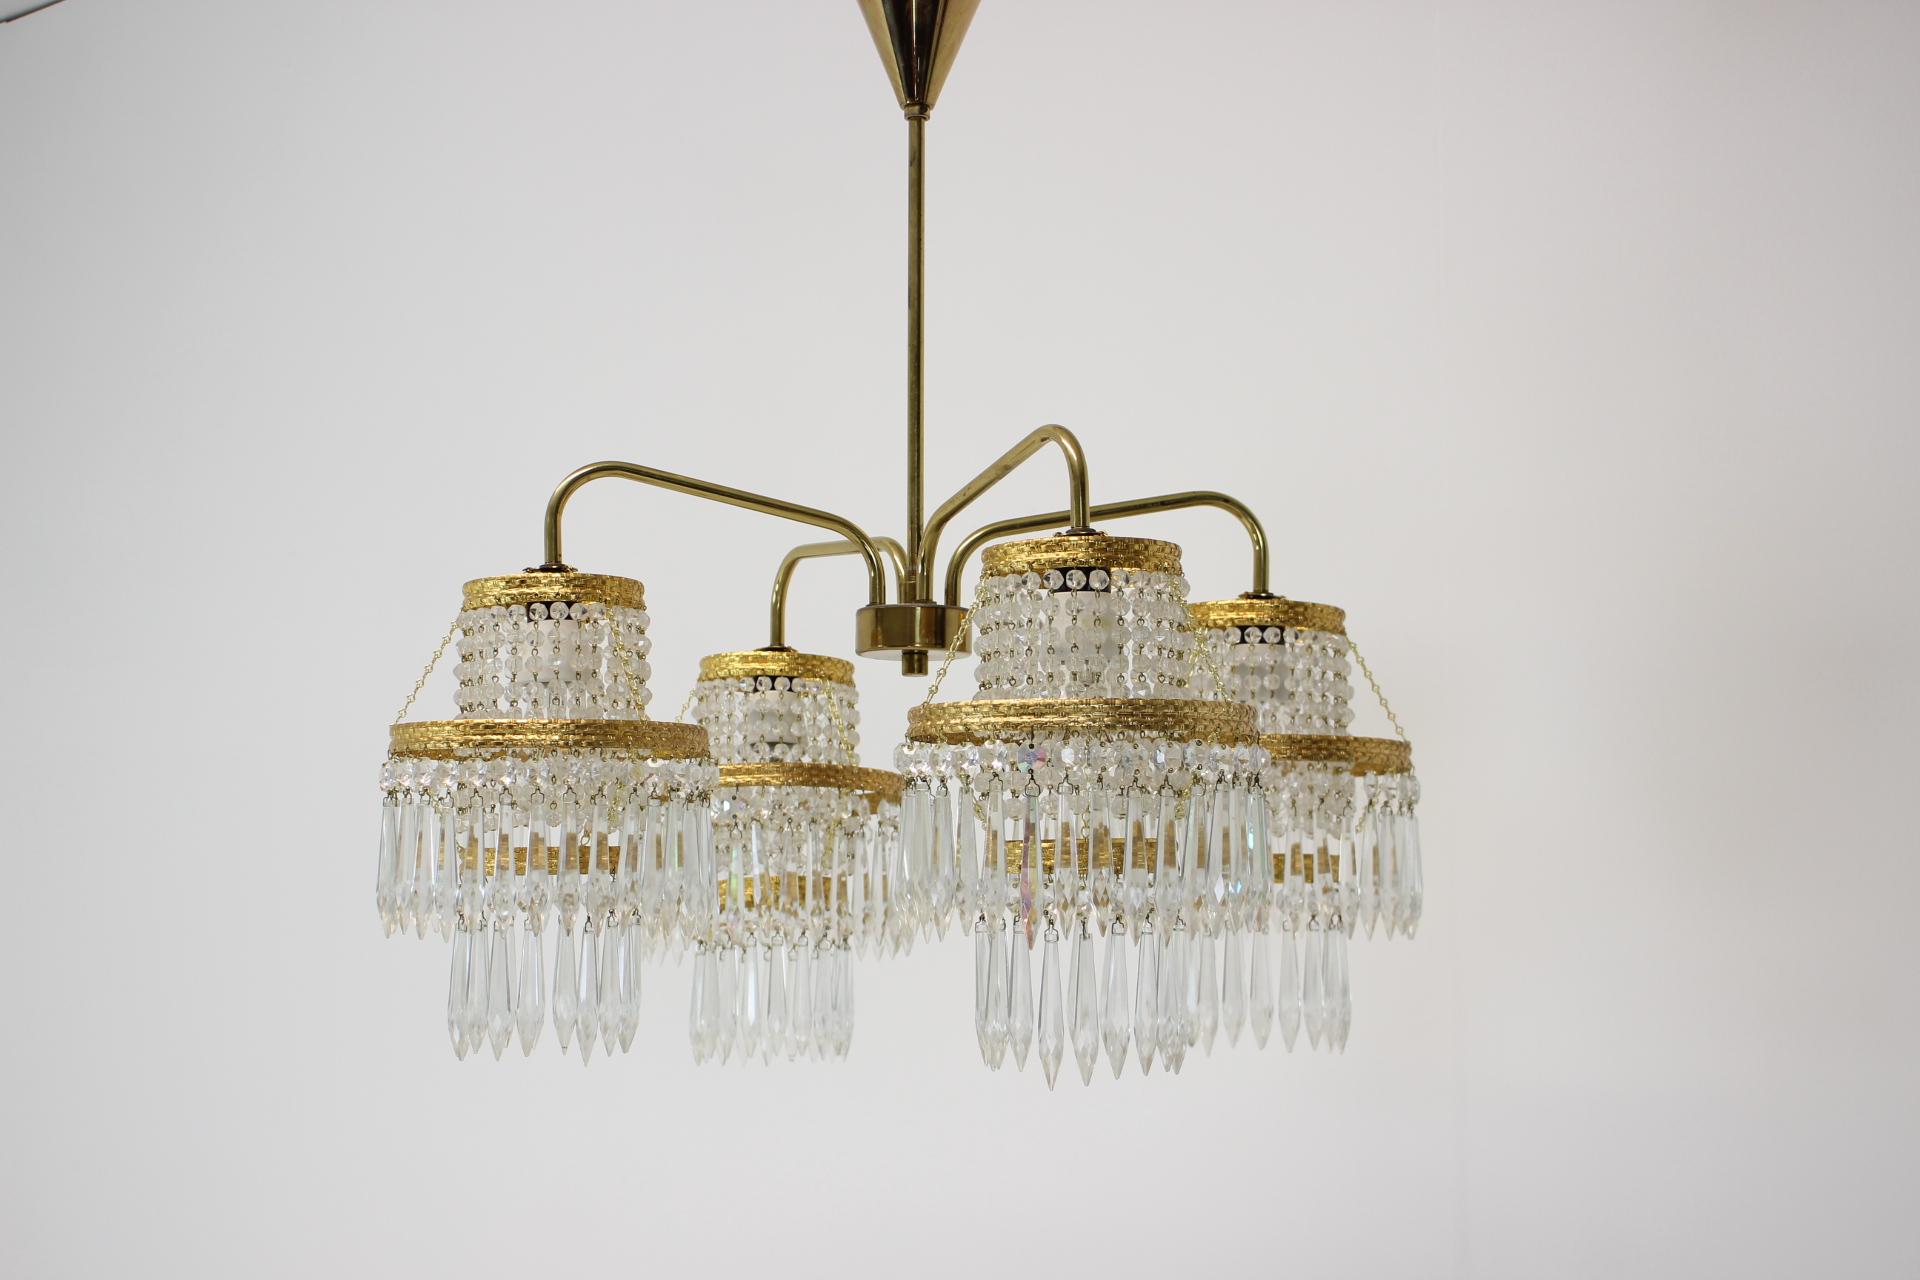 Made in Czechoslovakia
Made of crystal, brass
4x60W, E27 or E26 bulb
With aged patina
Re-polished
Good original condition
US wiring compatible.